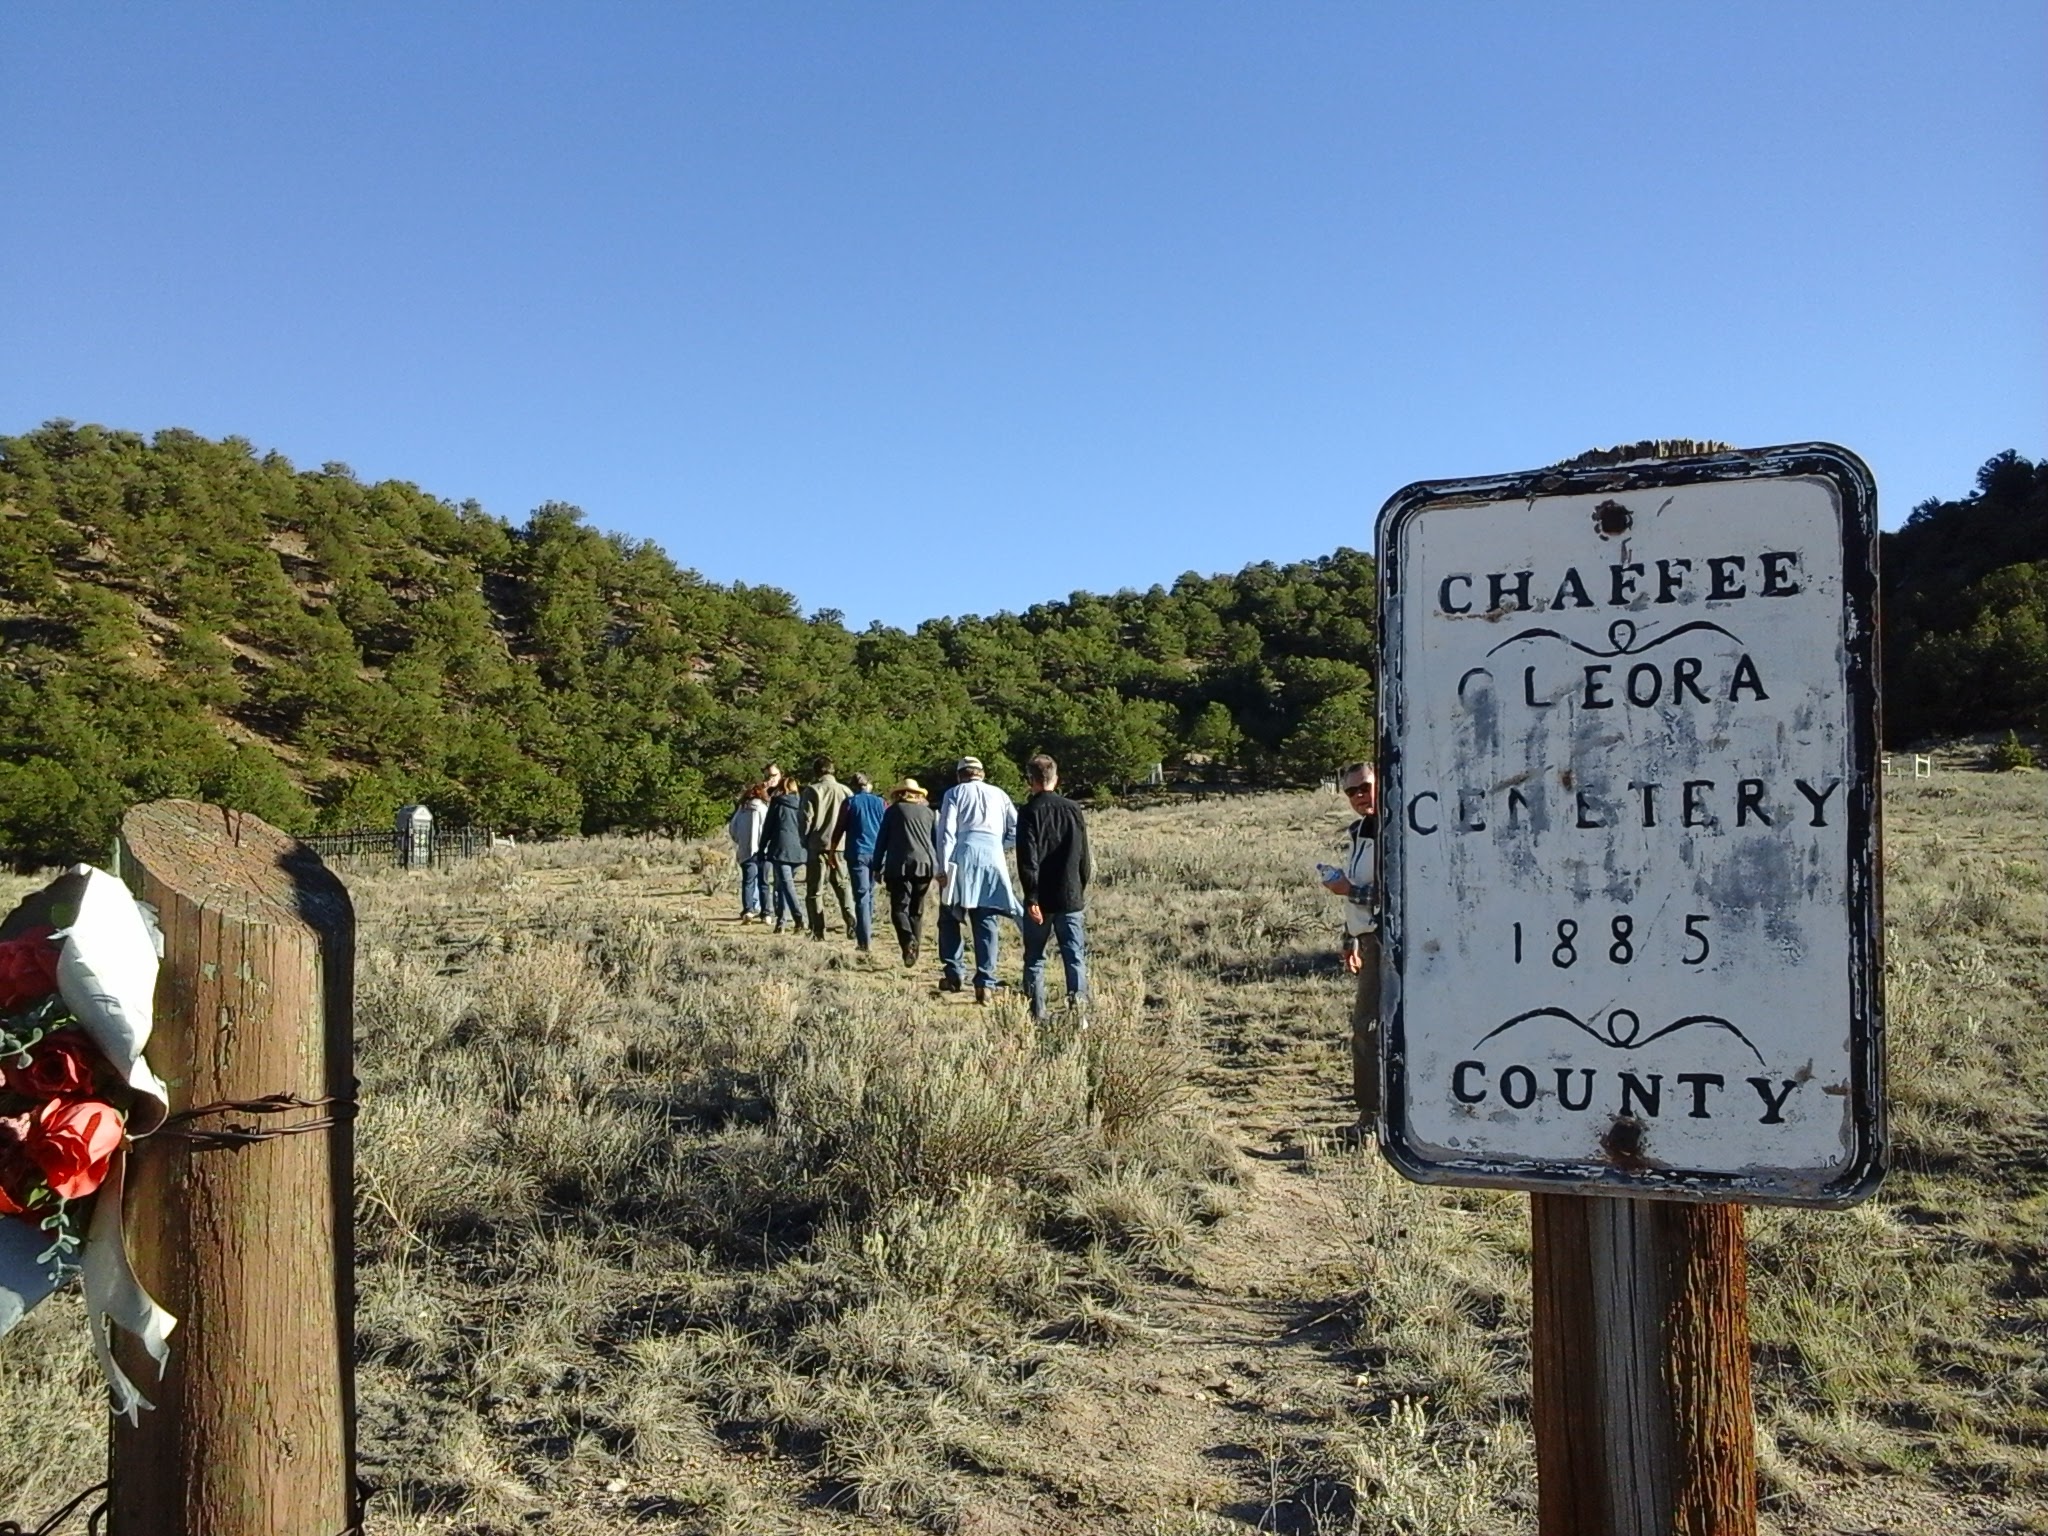 Salida walking tour at the Cleora Cemetery, on the National Register of Historic Places